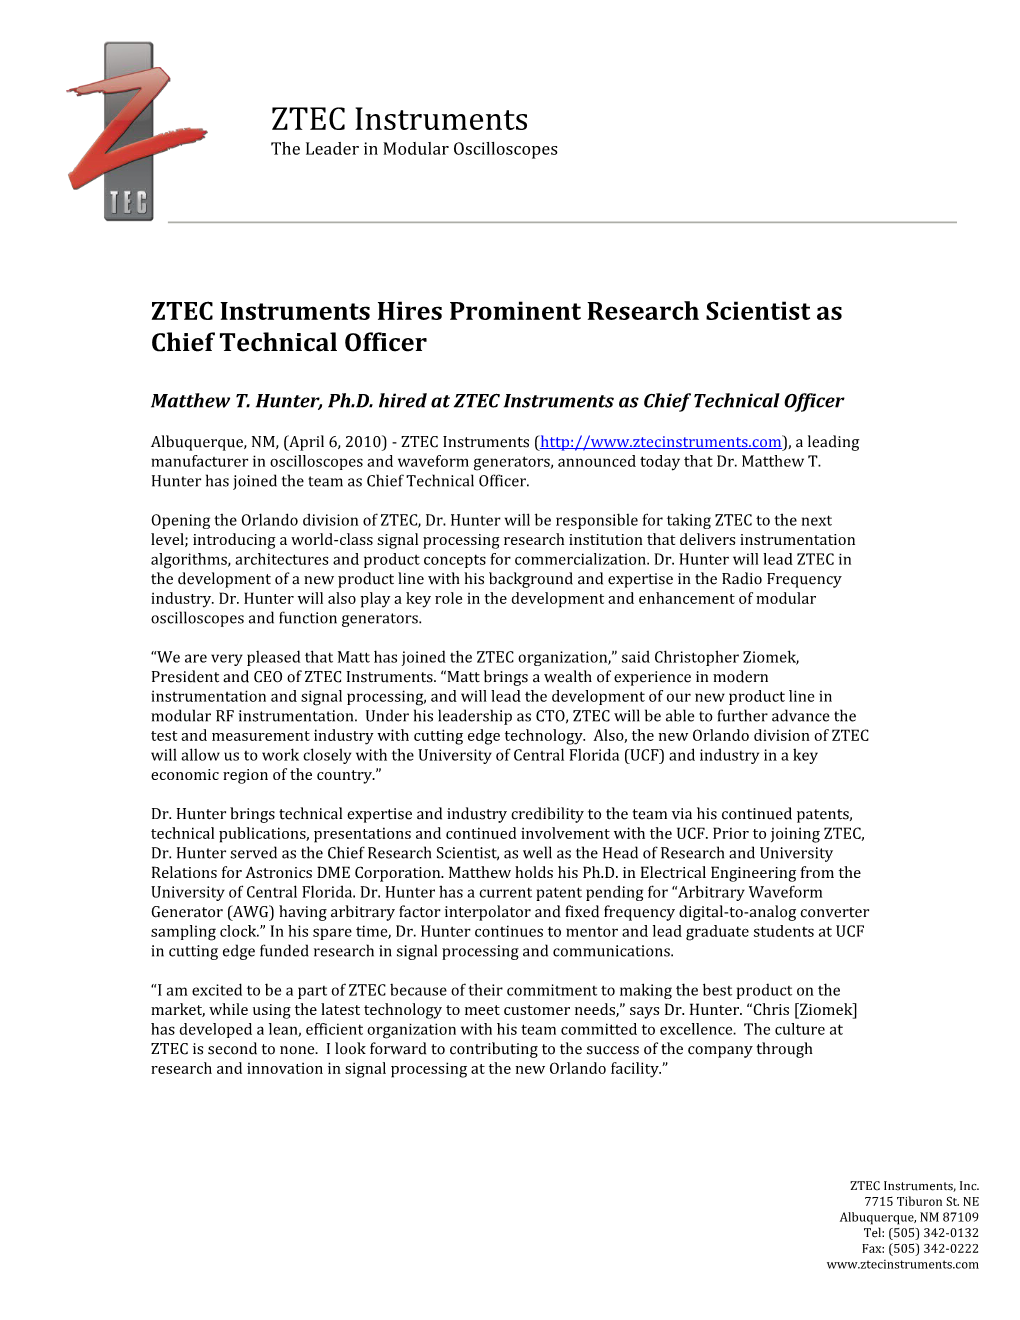 ZTEC Instruments Hires Prominent Research Scientist As Chief Technical Officer